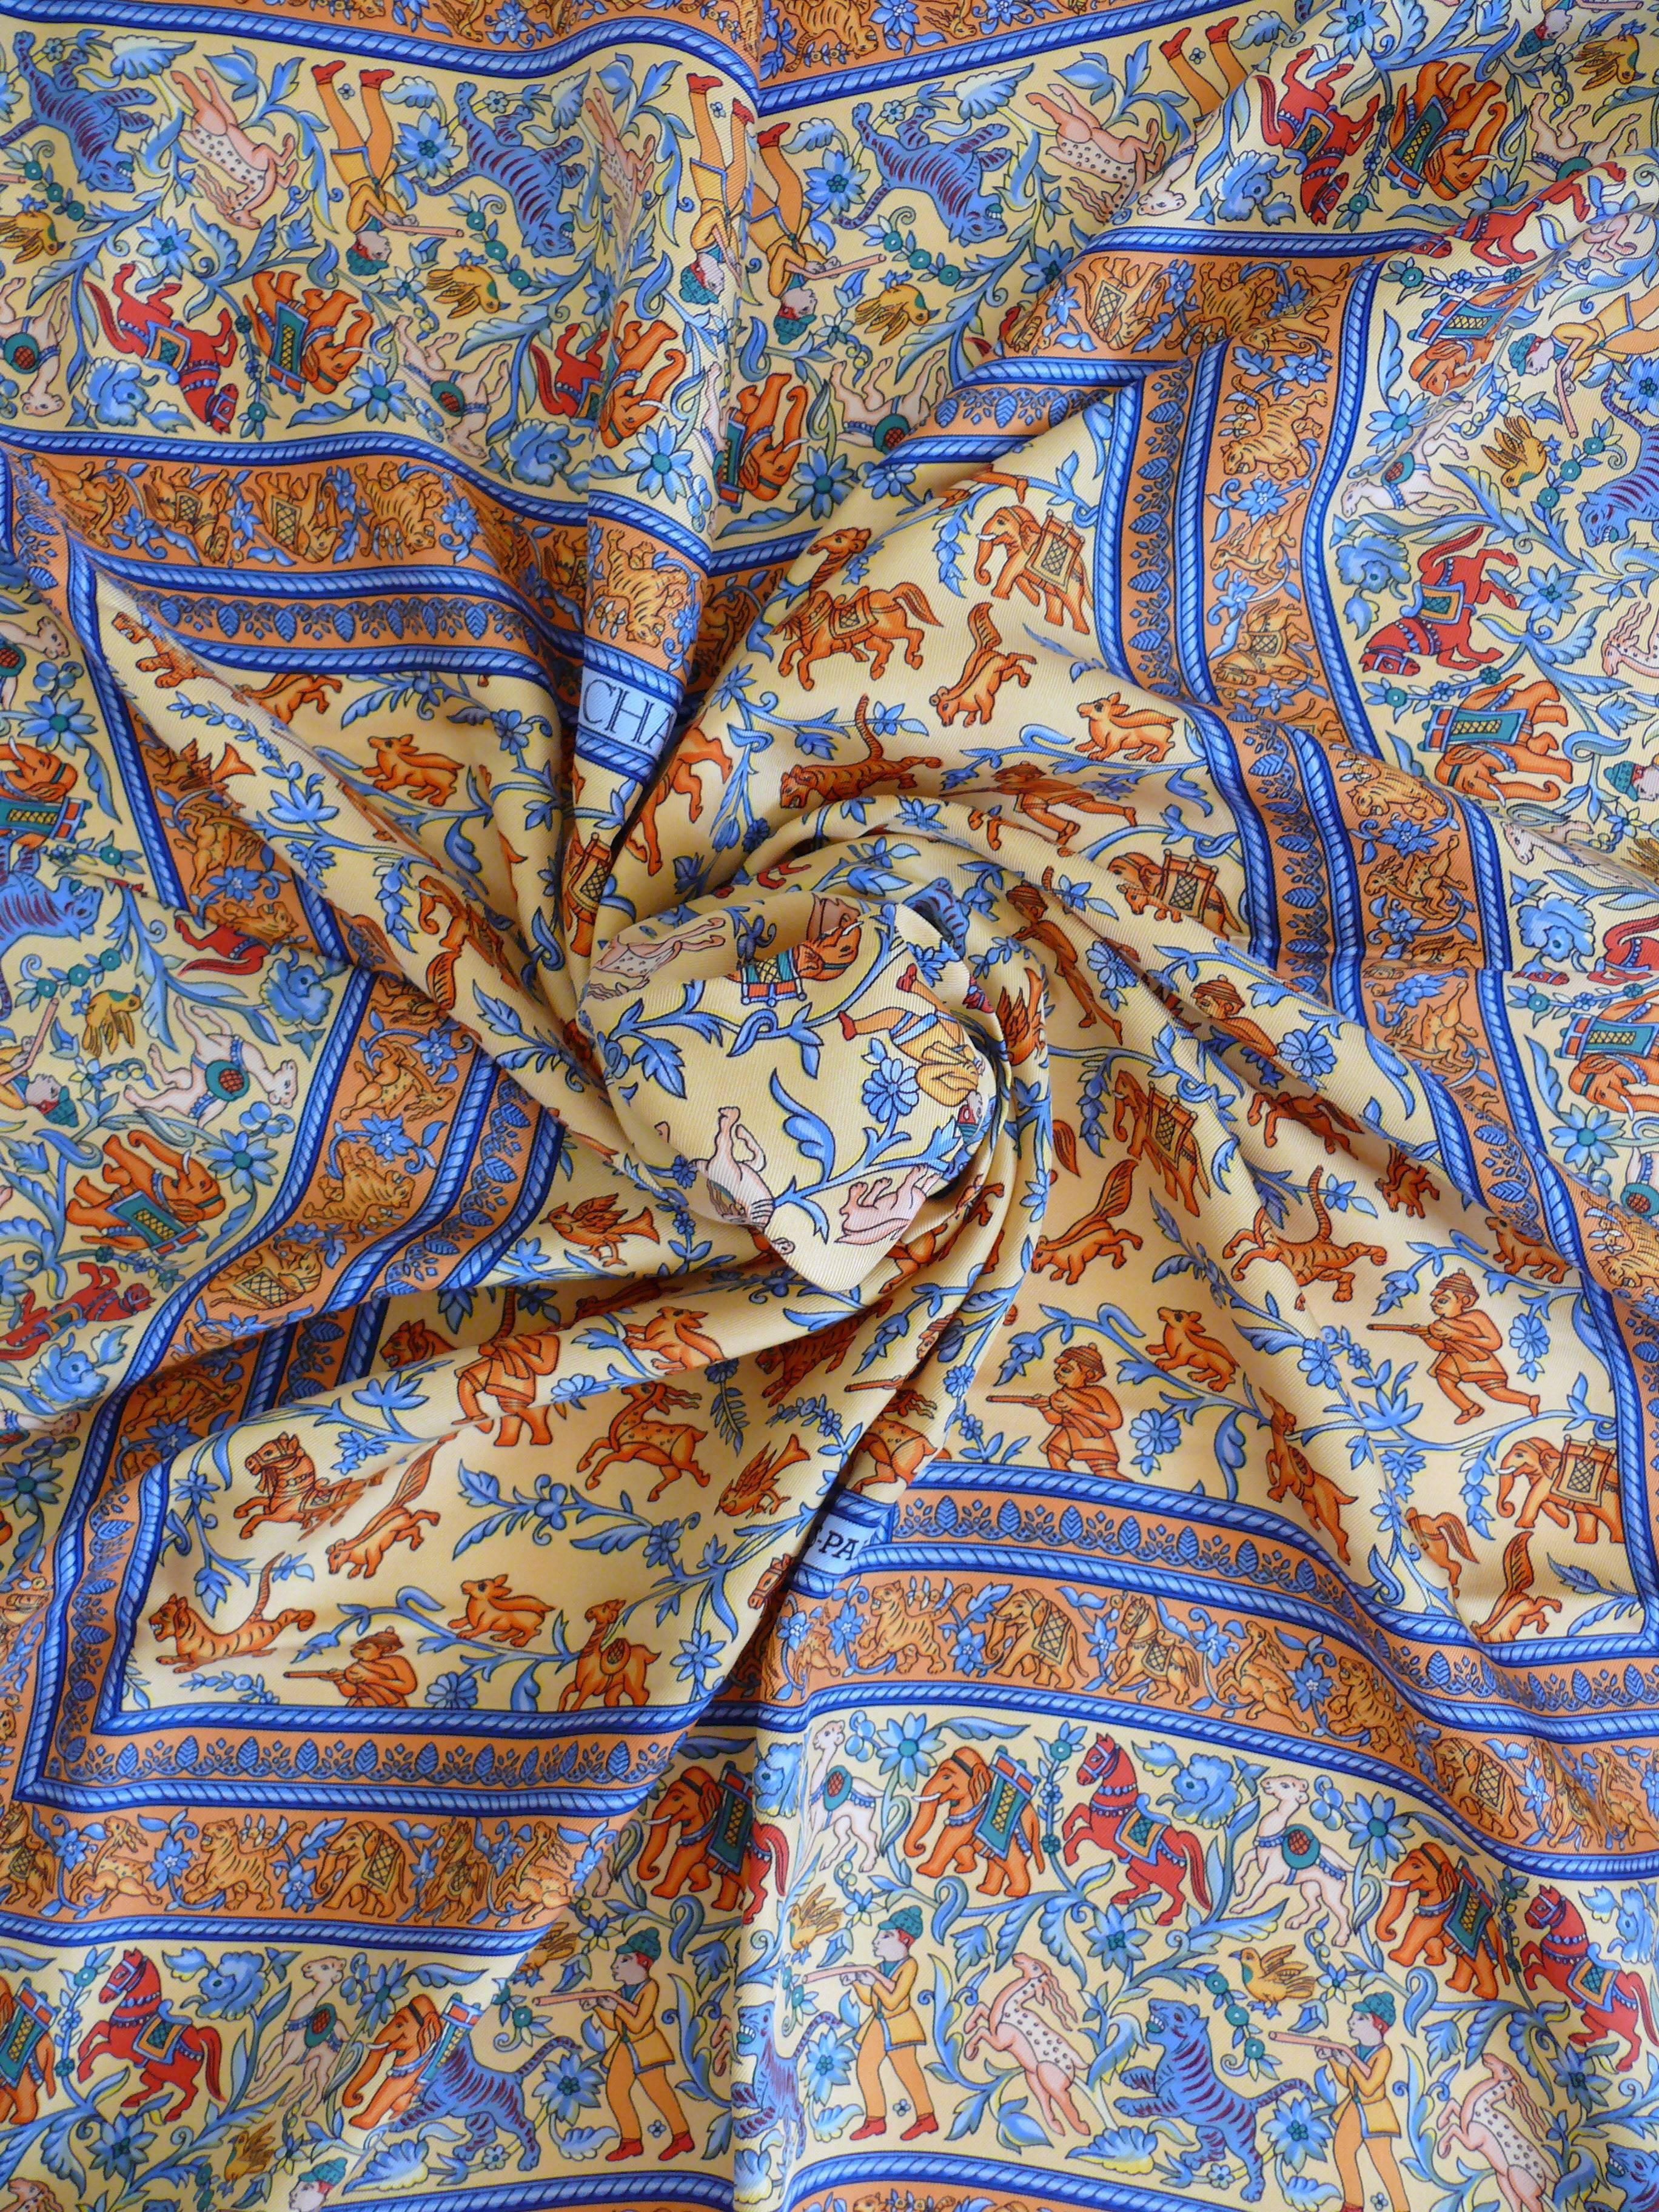 HERMES silk carré "Chasse en Inde" with an opulent muticolored design featuring exotic animals, hunters, horses and flowers.

Designed by MICHEL DUCHENE.

This scarf features :
- Hand rolled borders.
- Plump hems.
- 100 % silk.
-